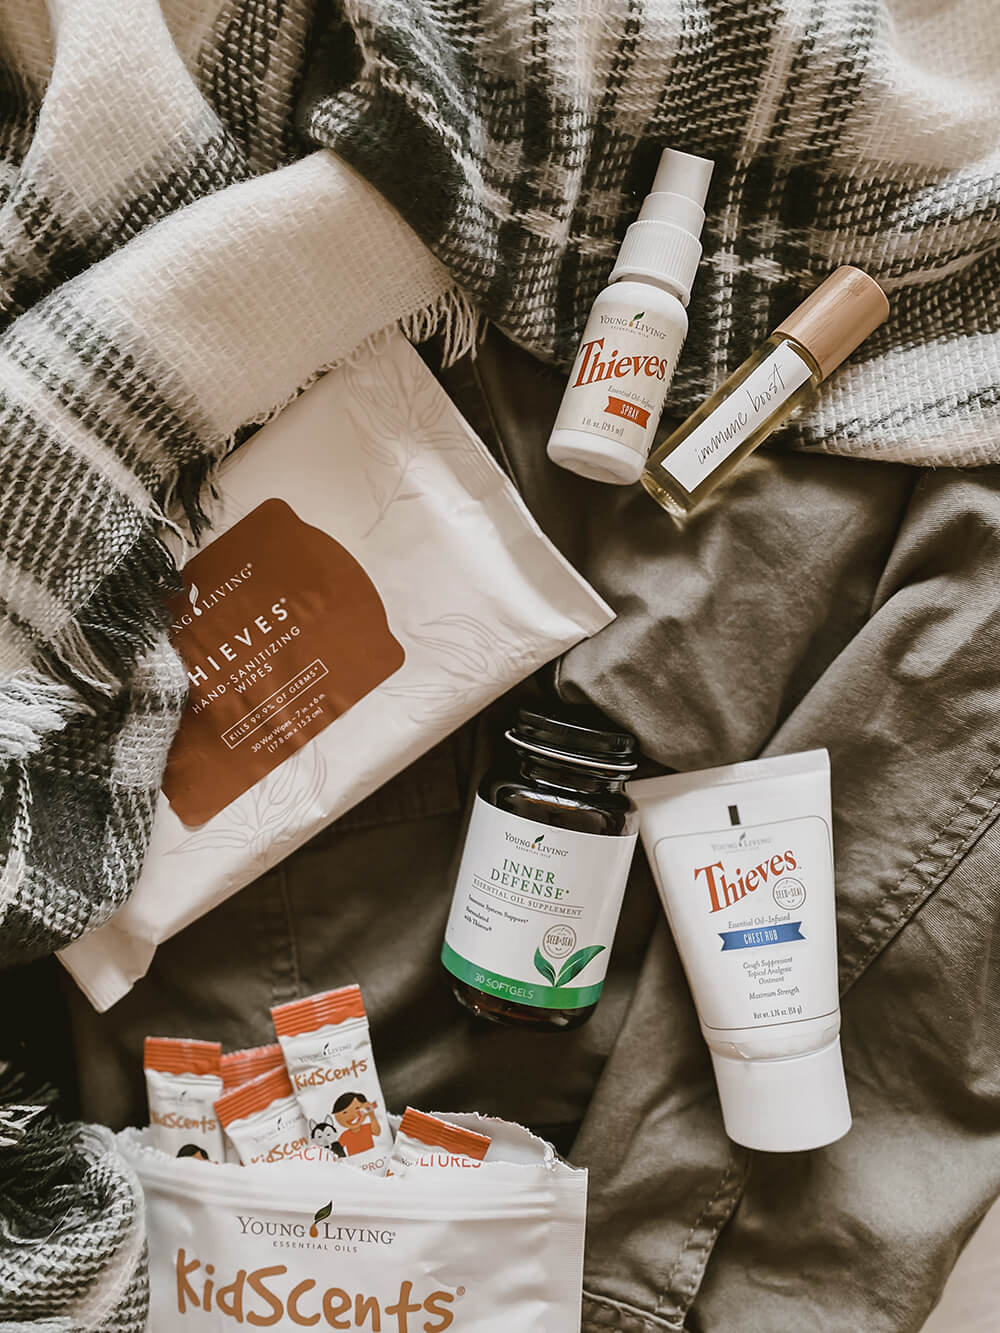 It's that time of year and keeping my family feeling good and well is top of mind. I am sharing my favorite winter wellness must-haves over on the blog!